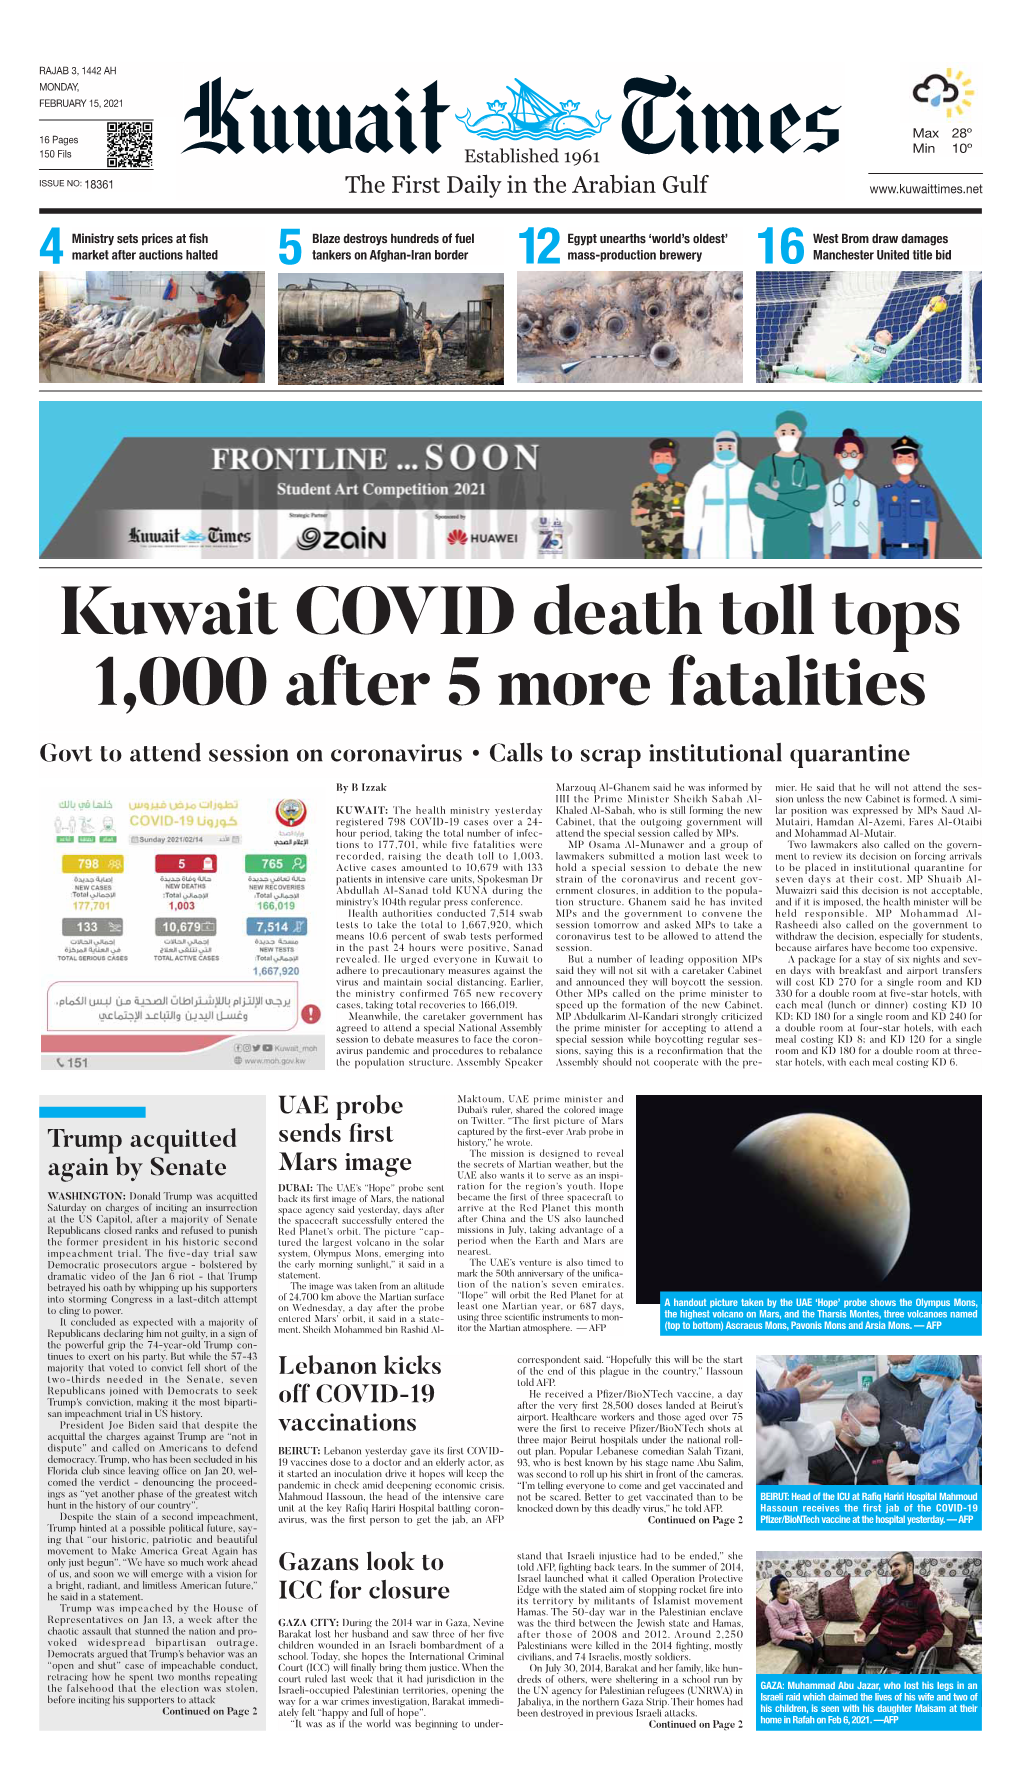 Kuwait COVID Death Toll Tops 1,000 After 5 More Fatalities